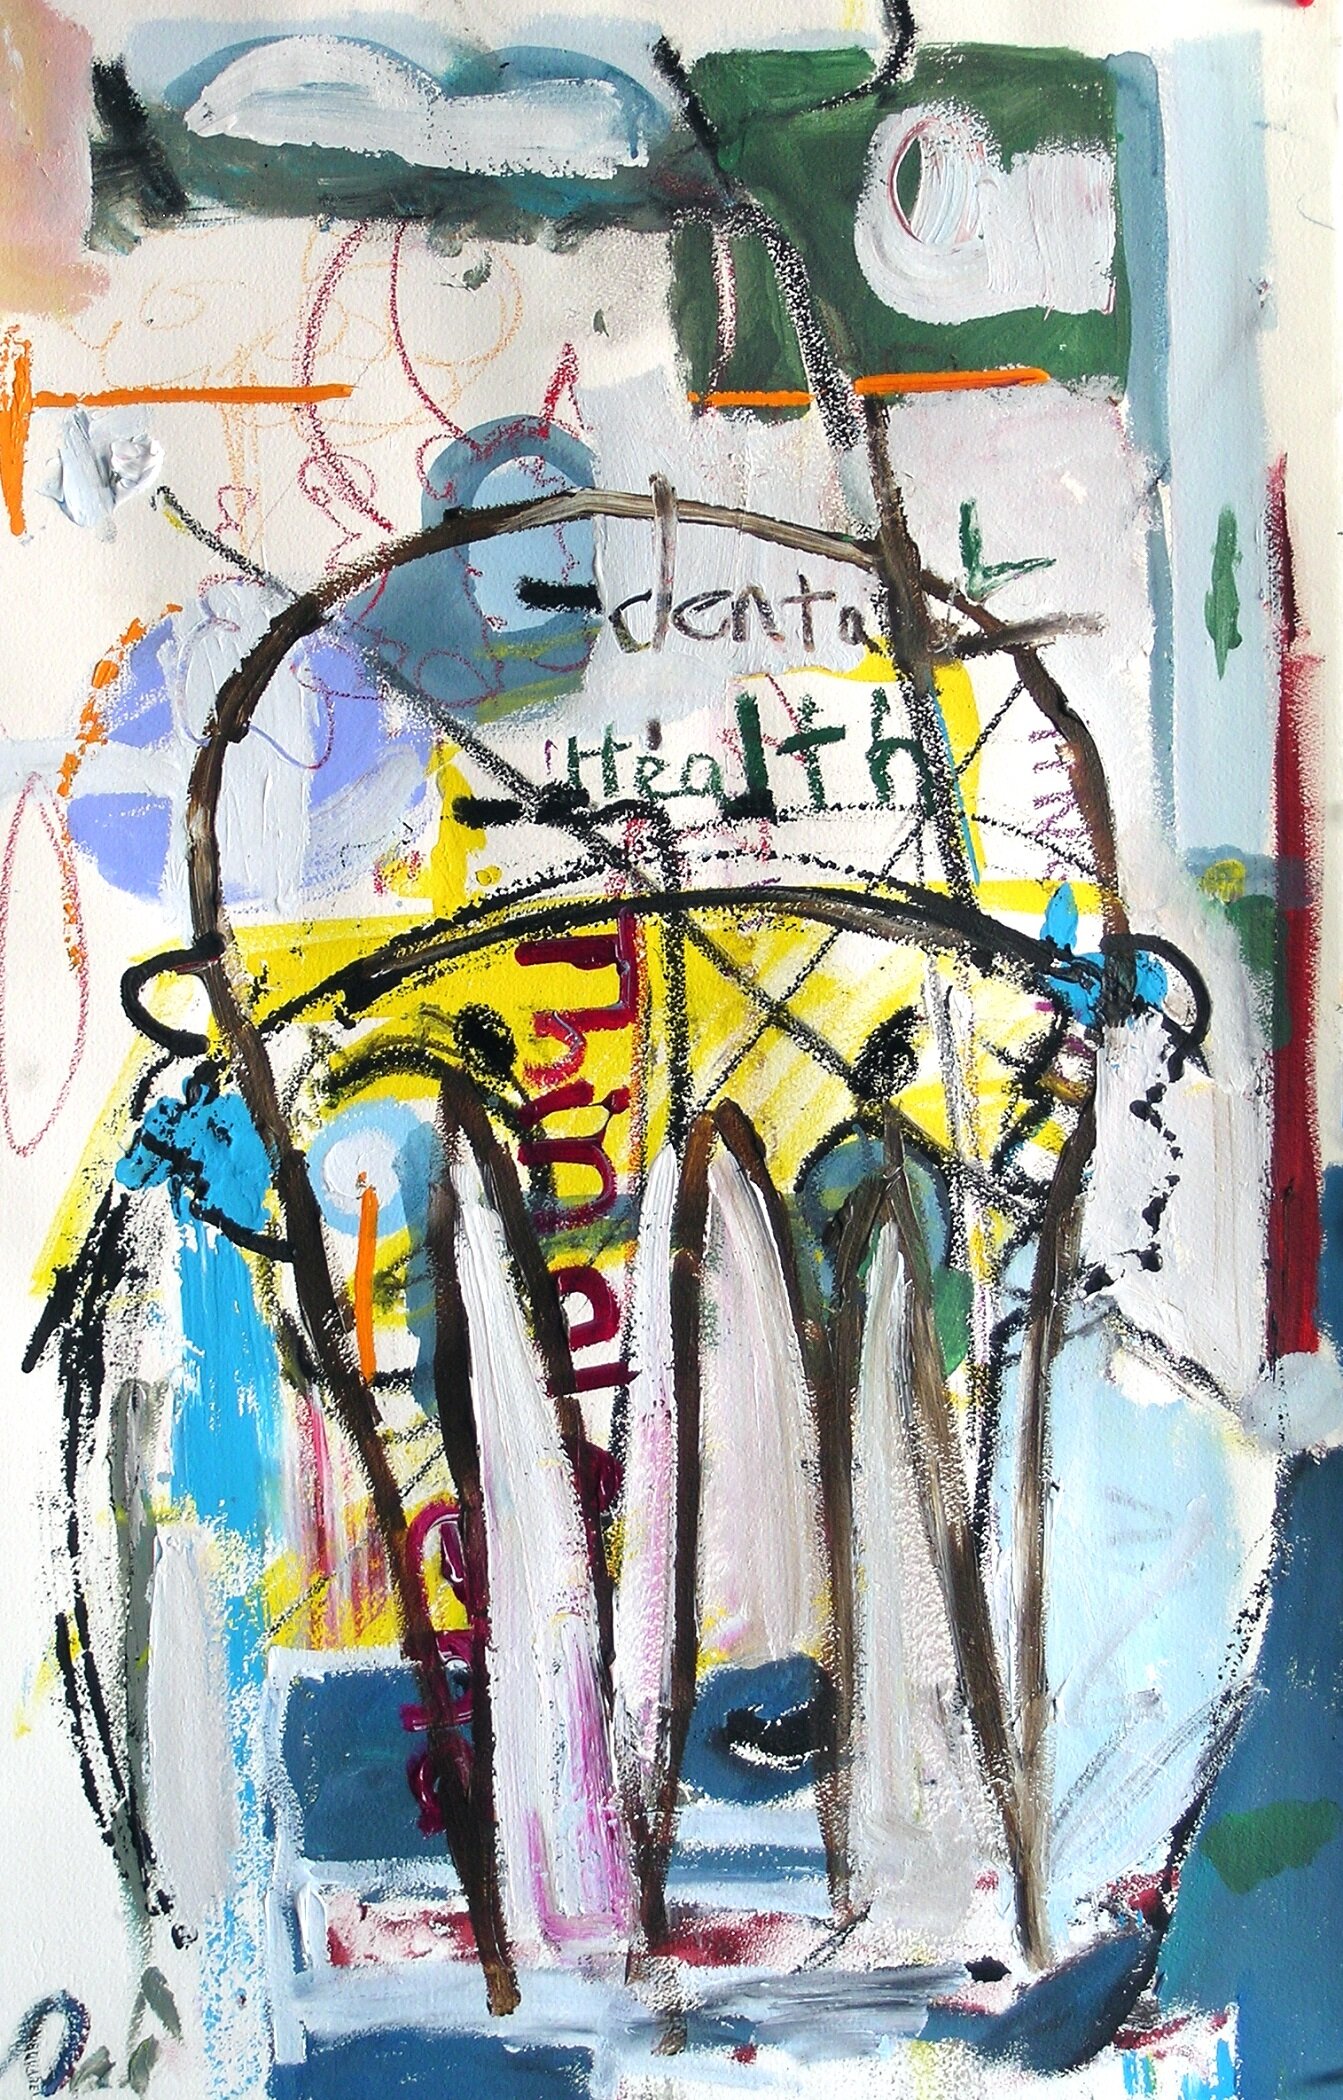  Iron Men Dental Health Mixed Media on Paper 2007 26 x 40 inches $3200 Available 